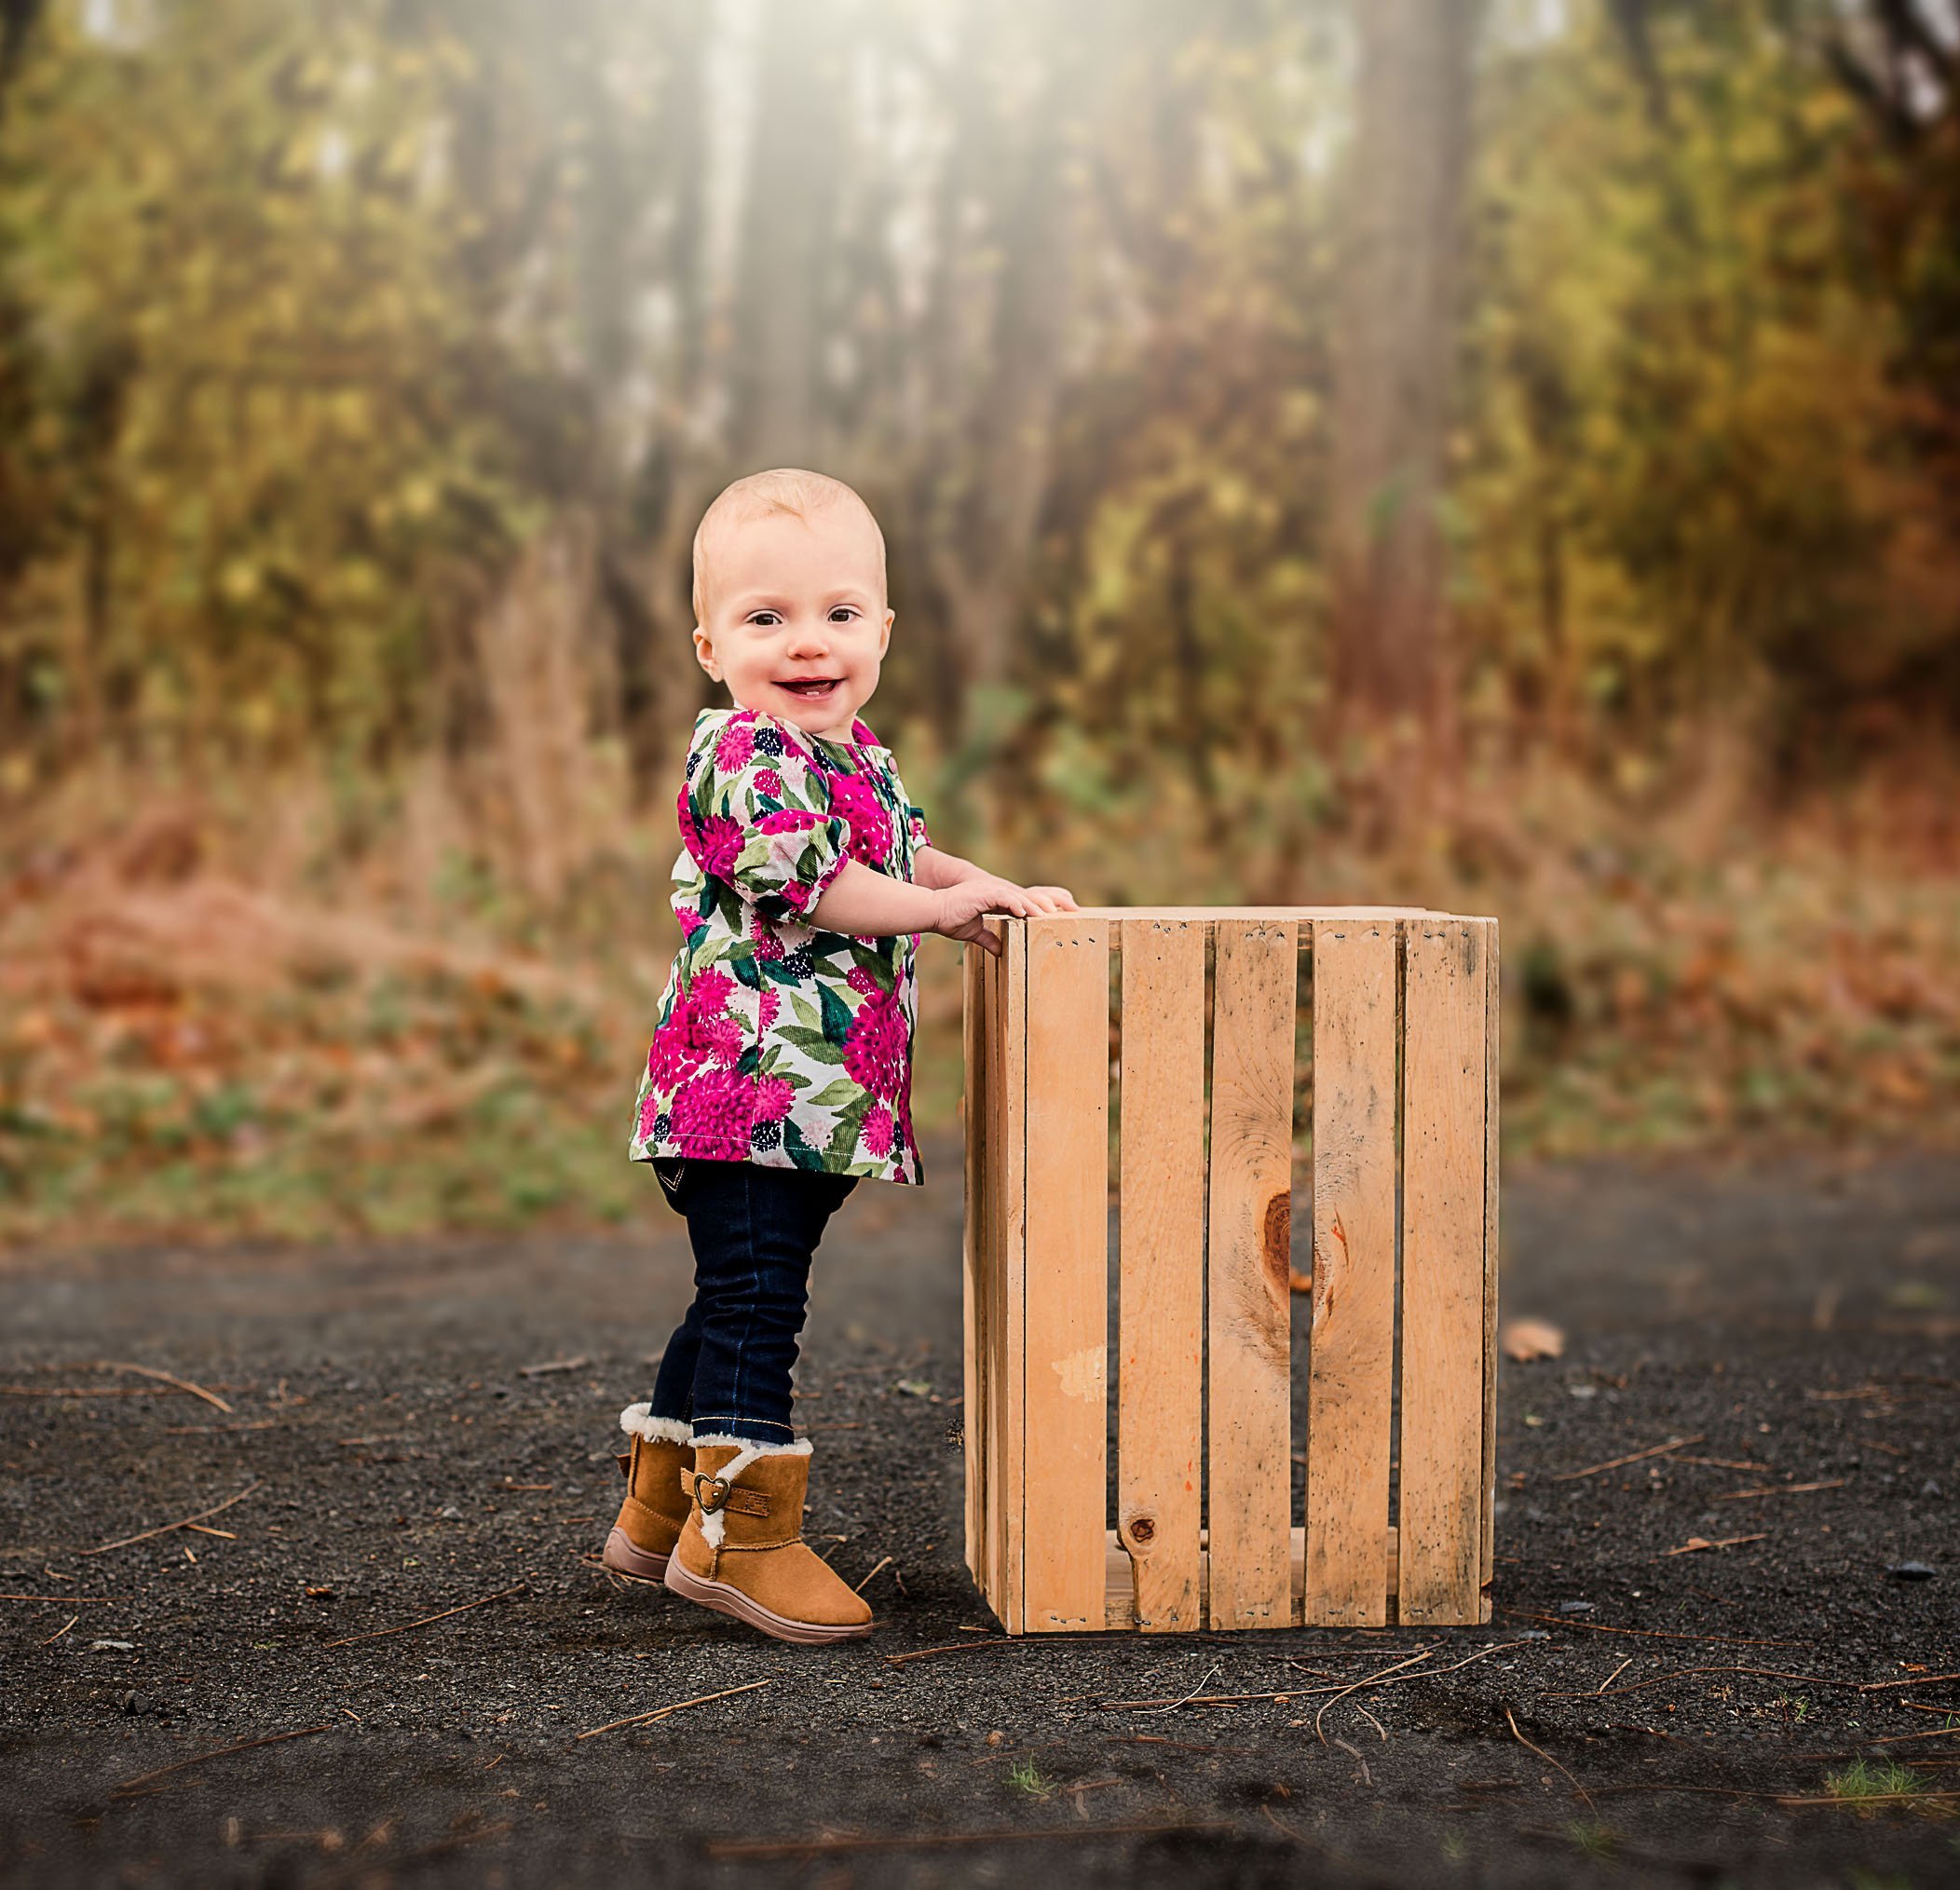 1 year old girl standing near crate outside in fall